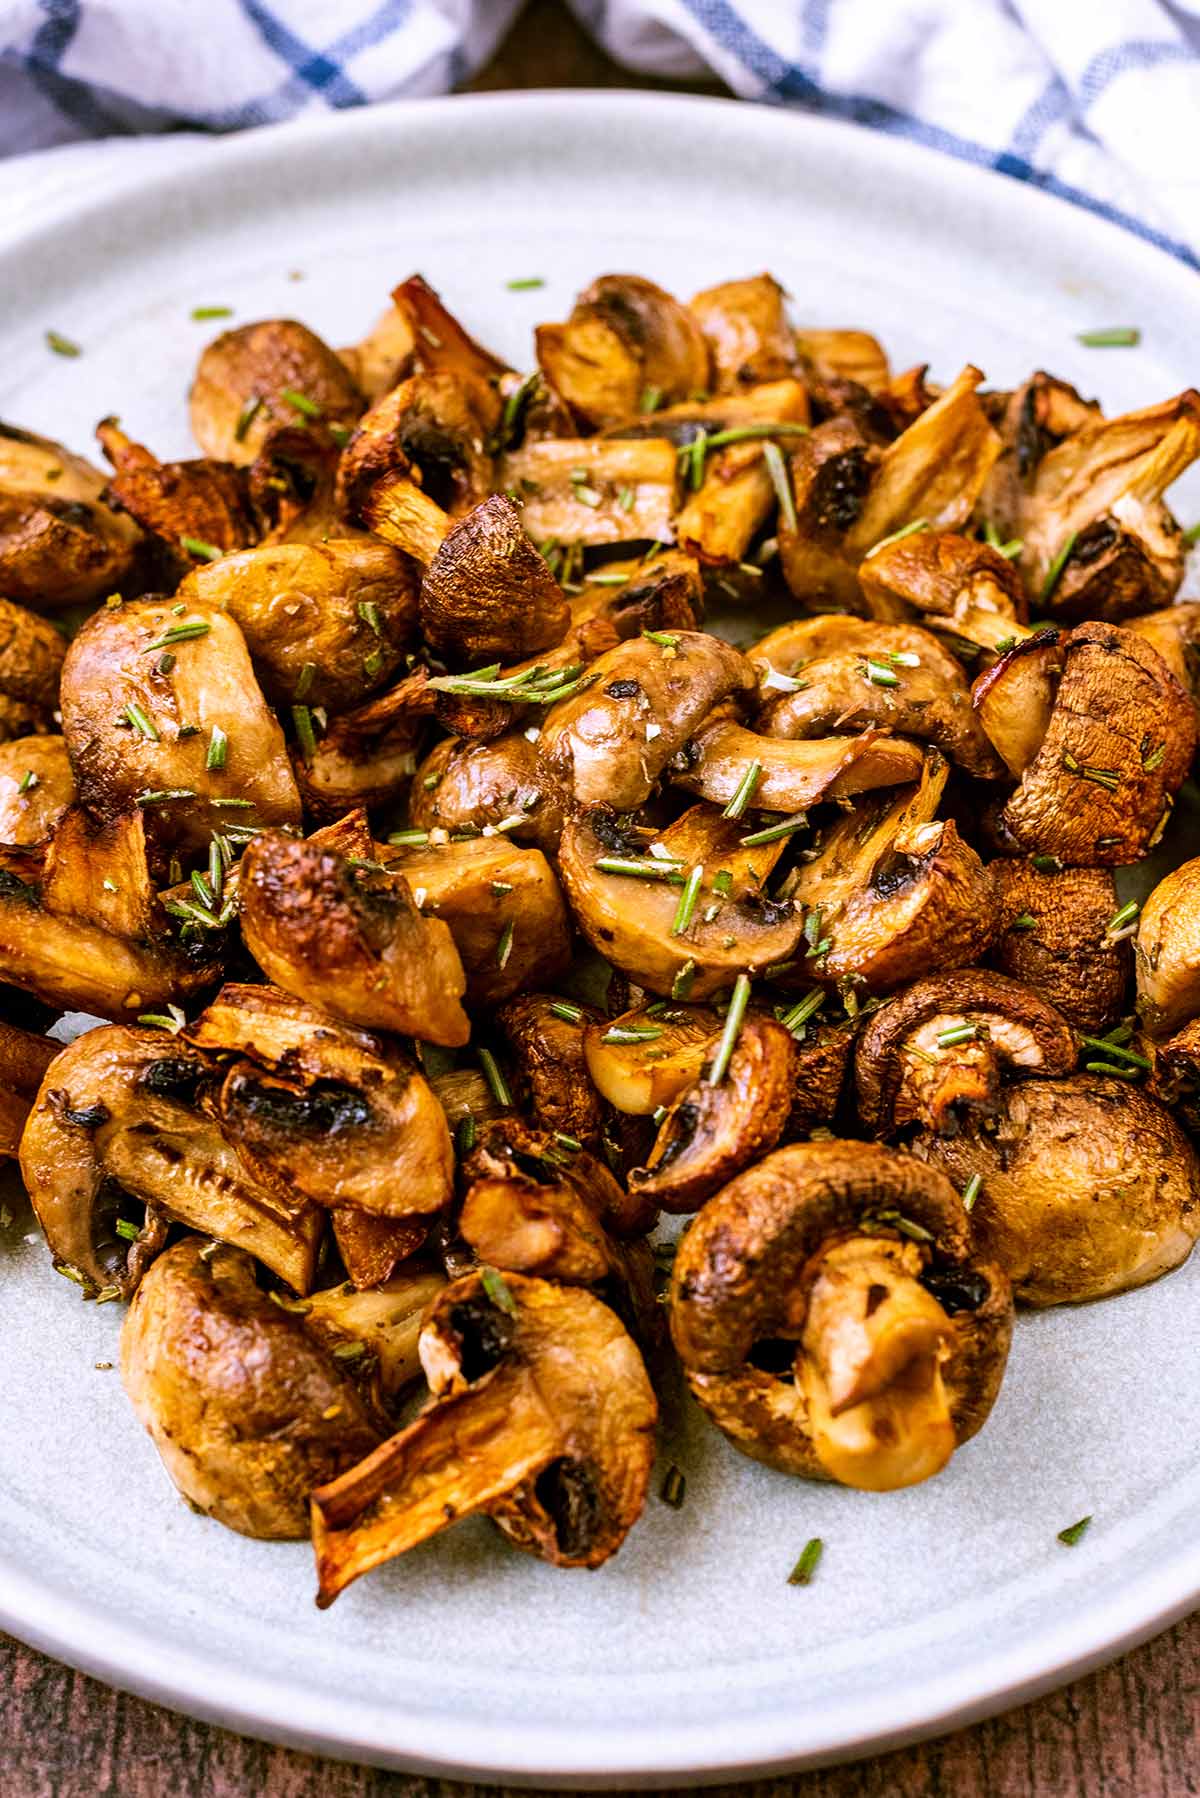 A plate of cooked mushrooms in front of a tea towel.